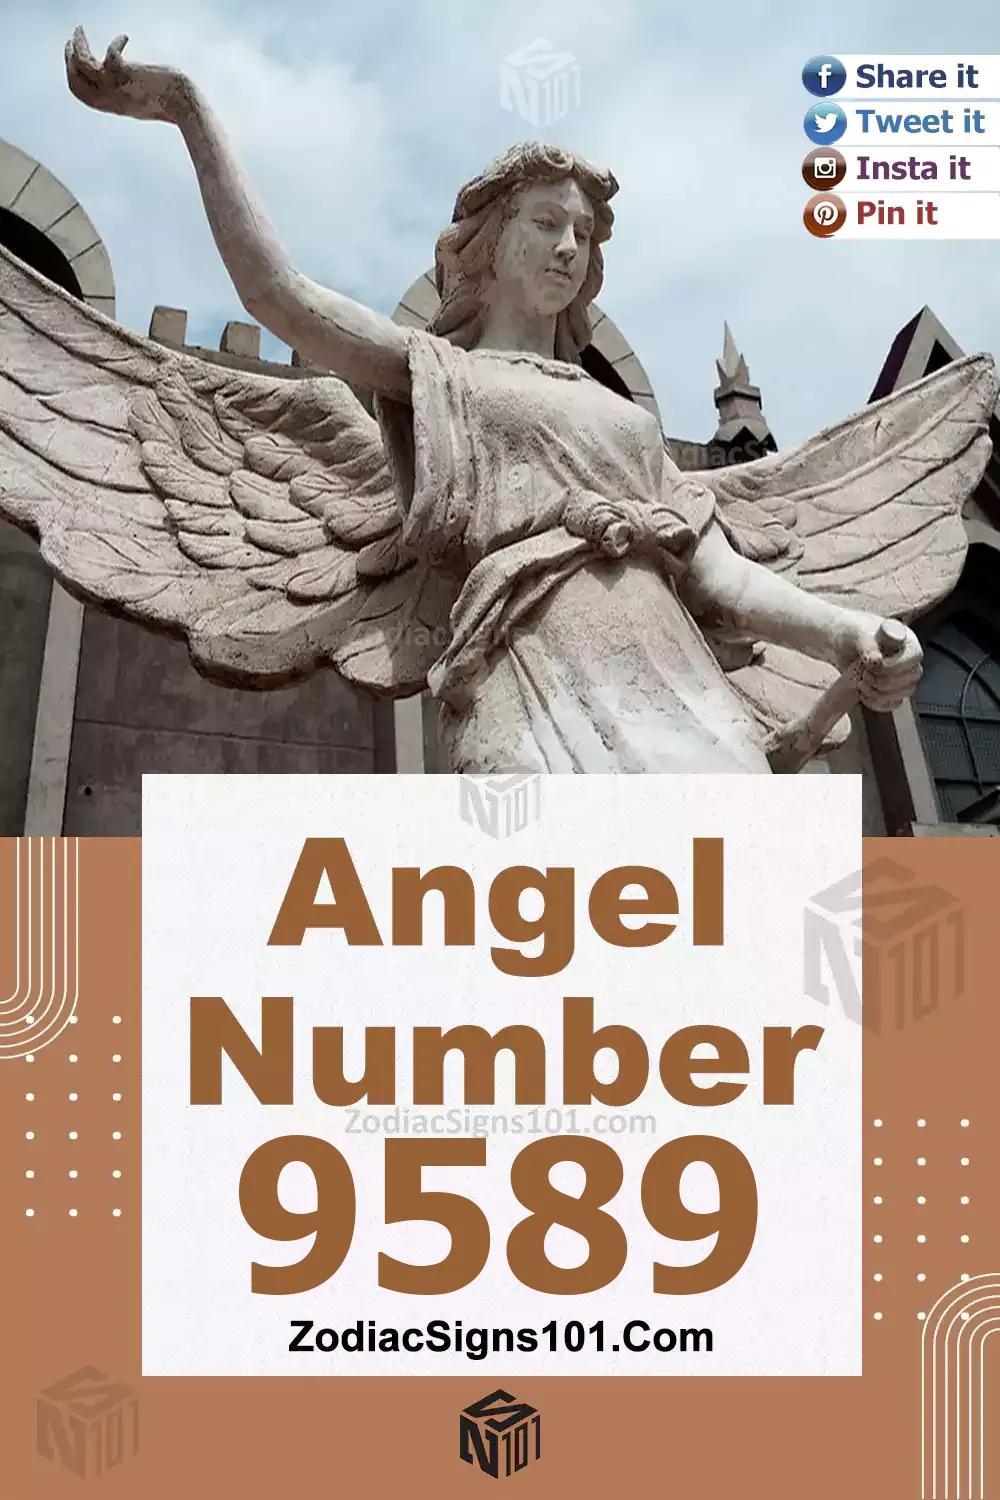 9589 Angel Number Meaning